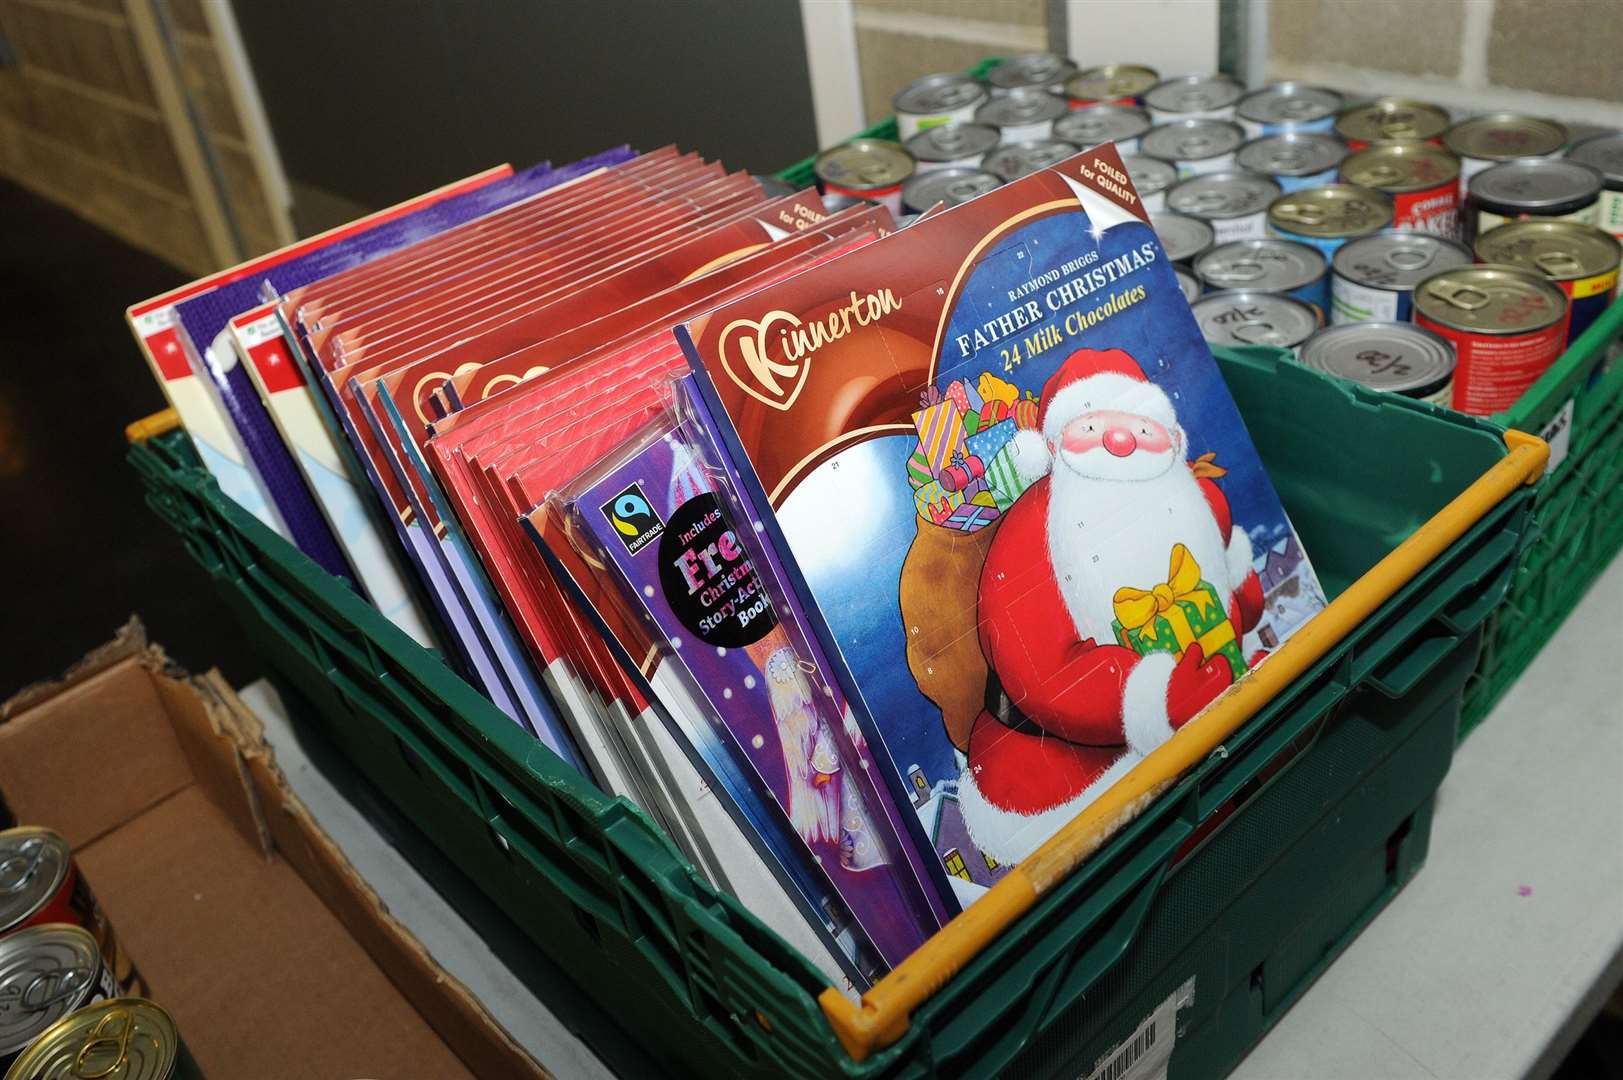 Advent calendars can be a popular addition to food bank donations ahead of December